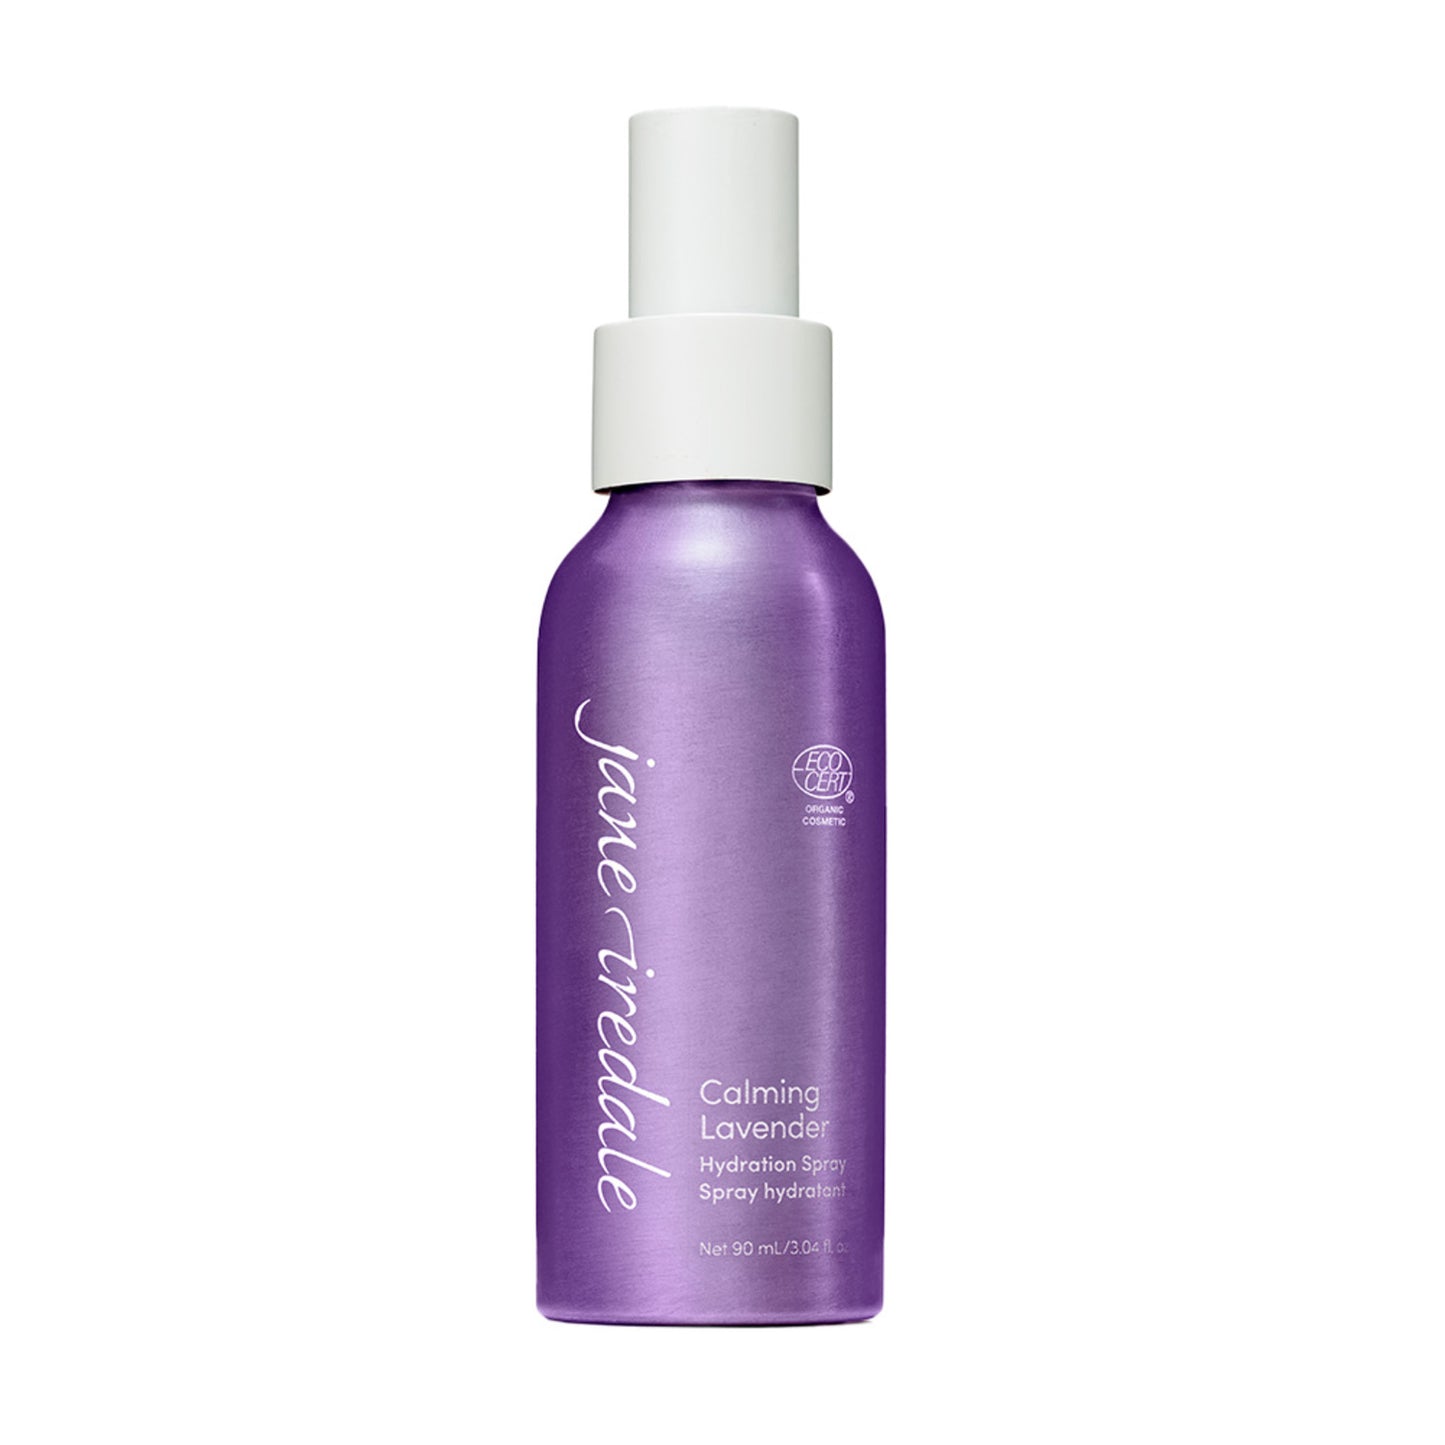 jane iredale Calming Lavender Hydration